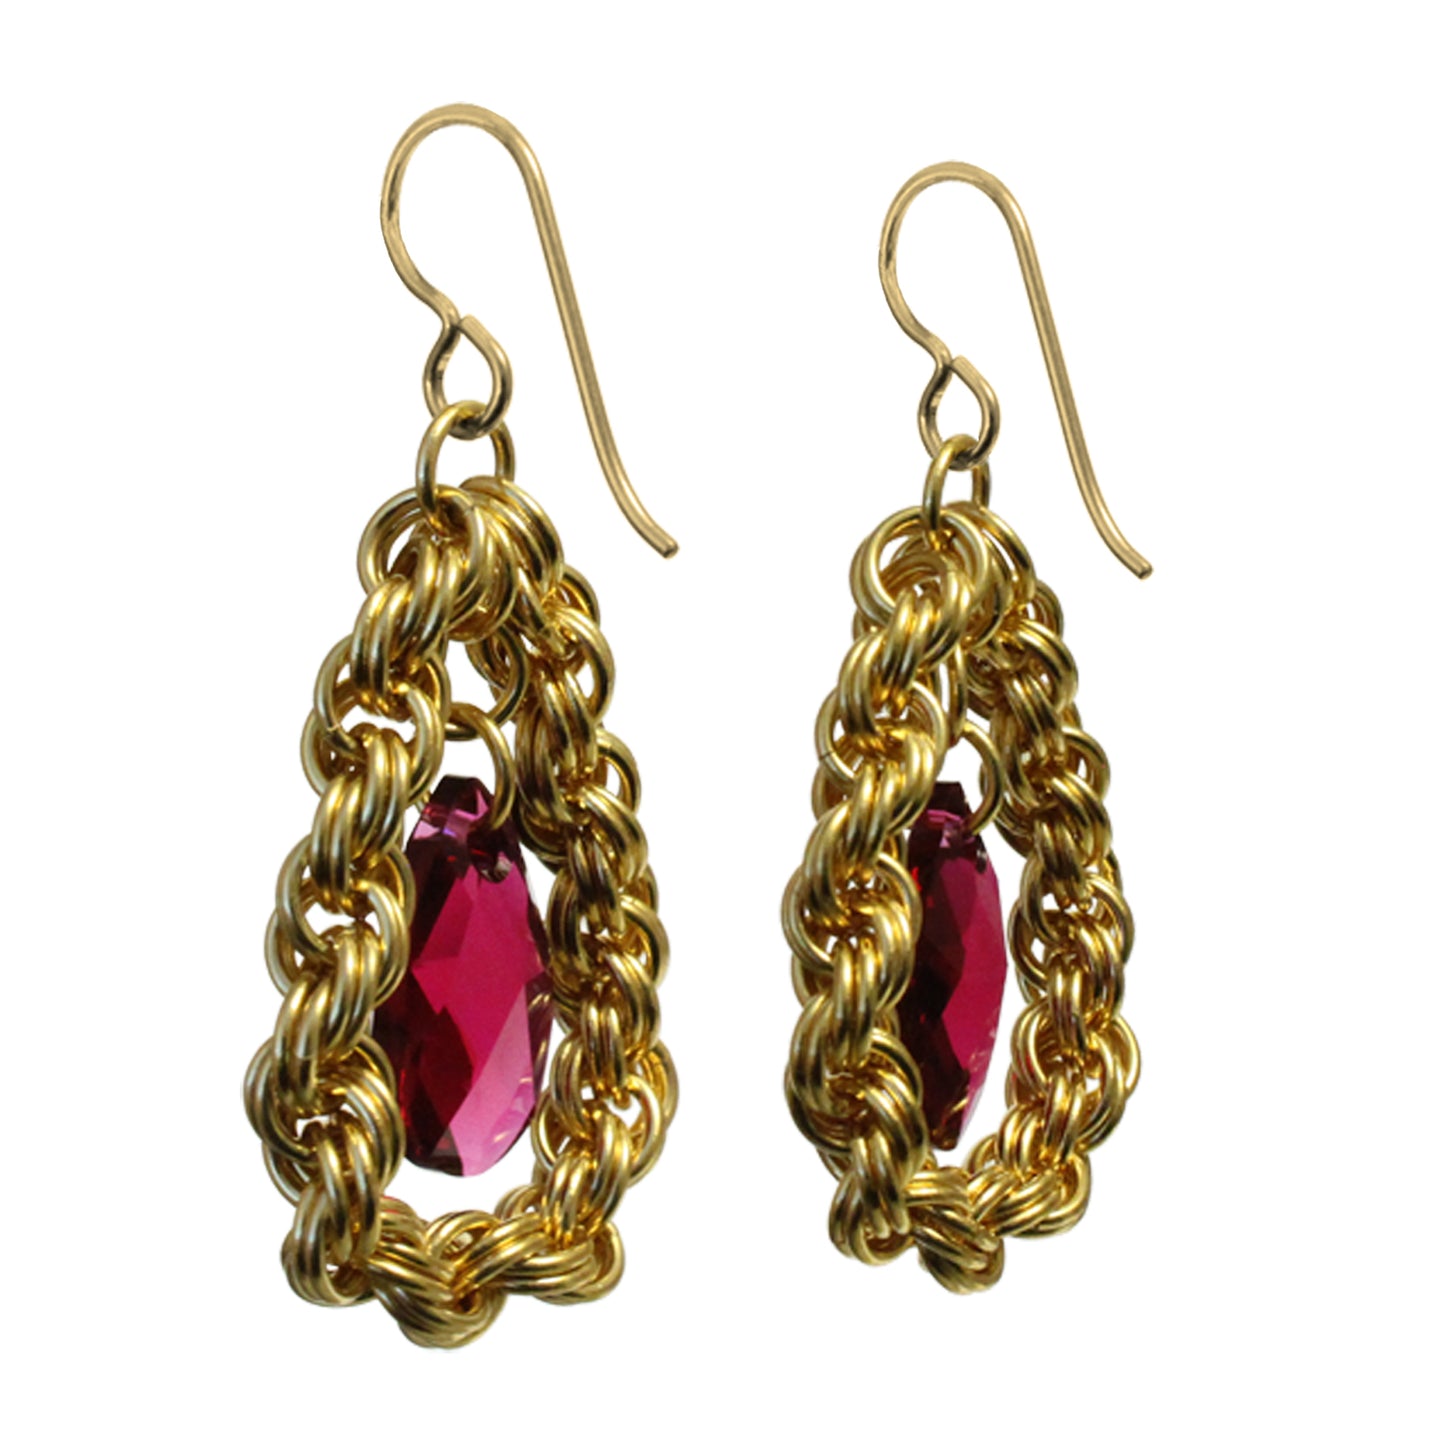 Red Carpet Chainmail Earrings / 48mm length / gold filled earwires